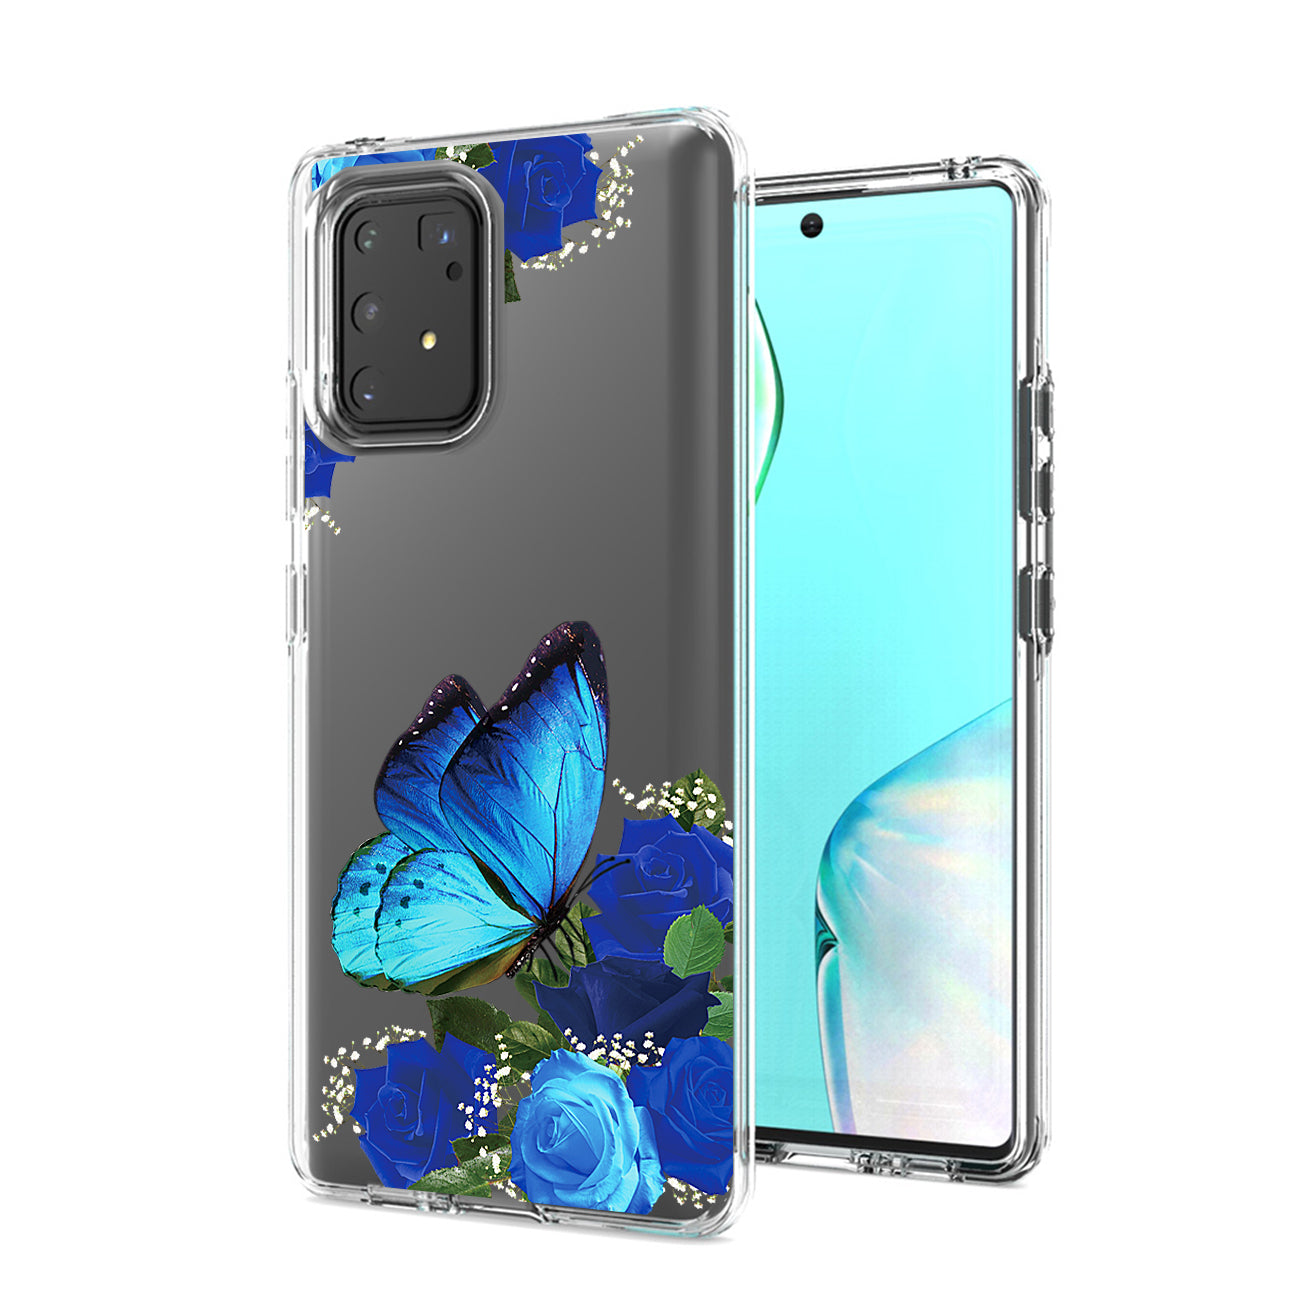 Pressed dried flower Design Phone case for SAMSUNG GALAXY A91/S10 Lite/M80S In Blue